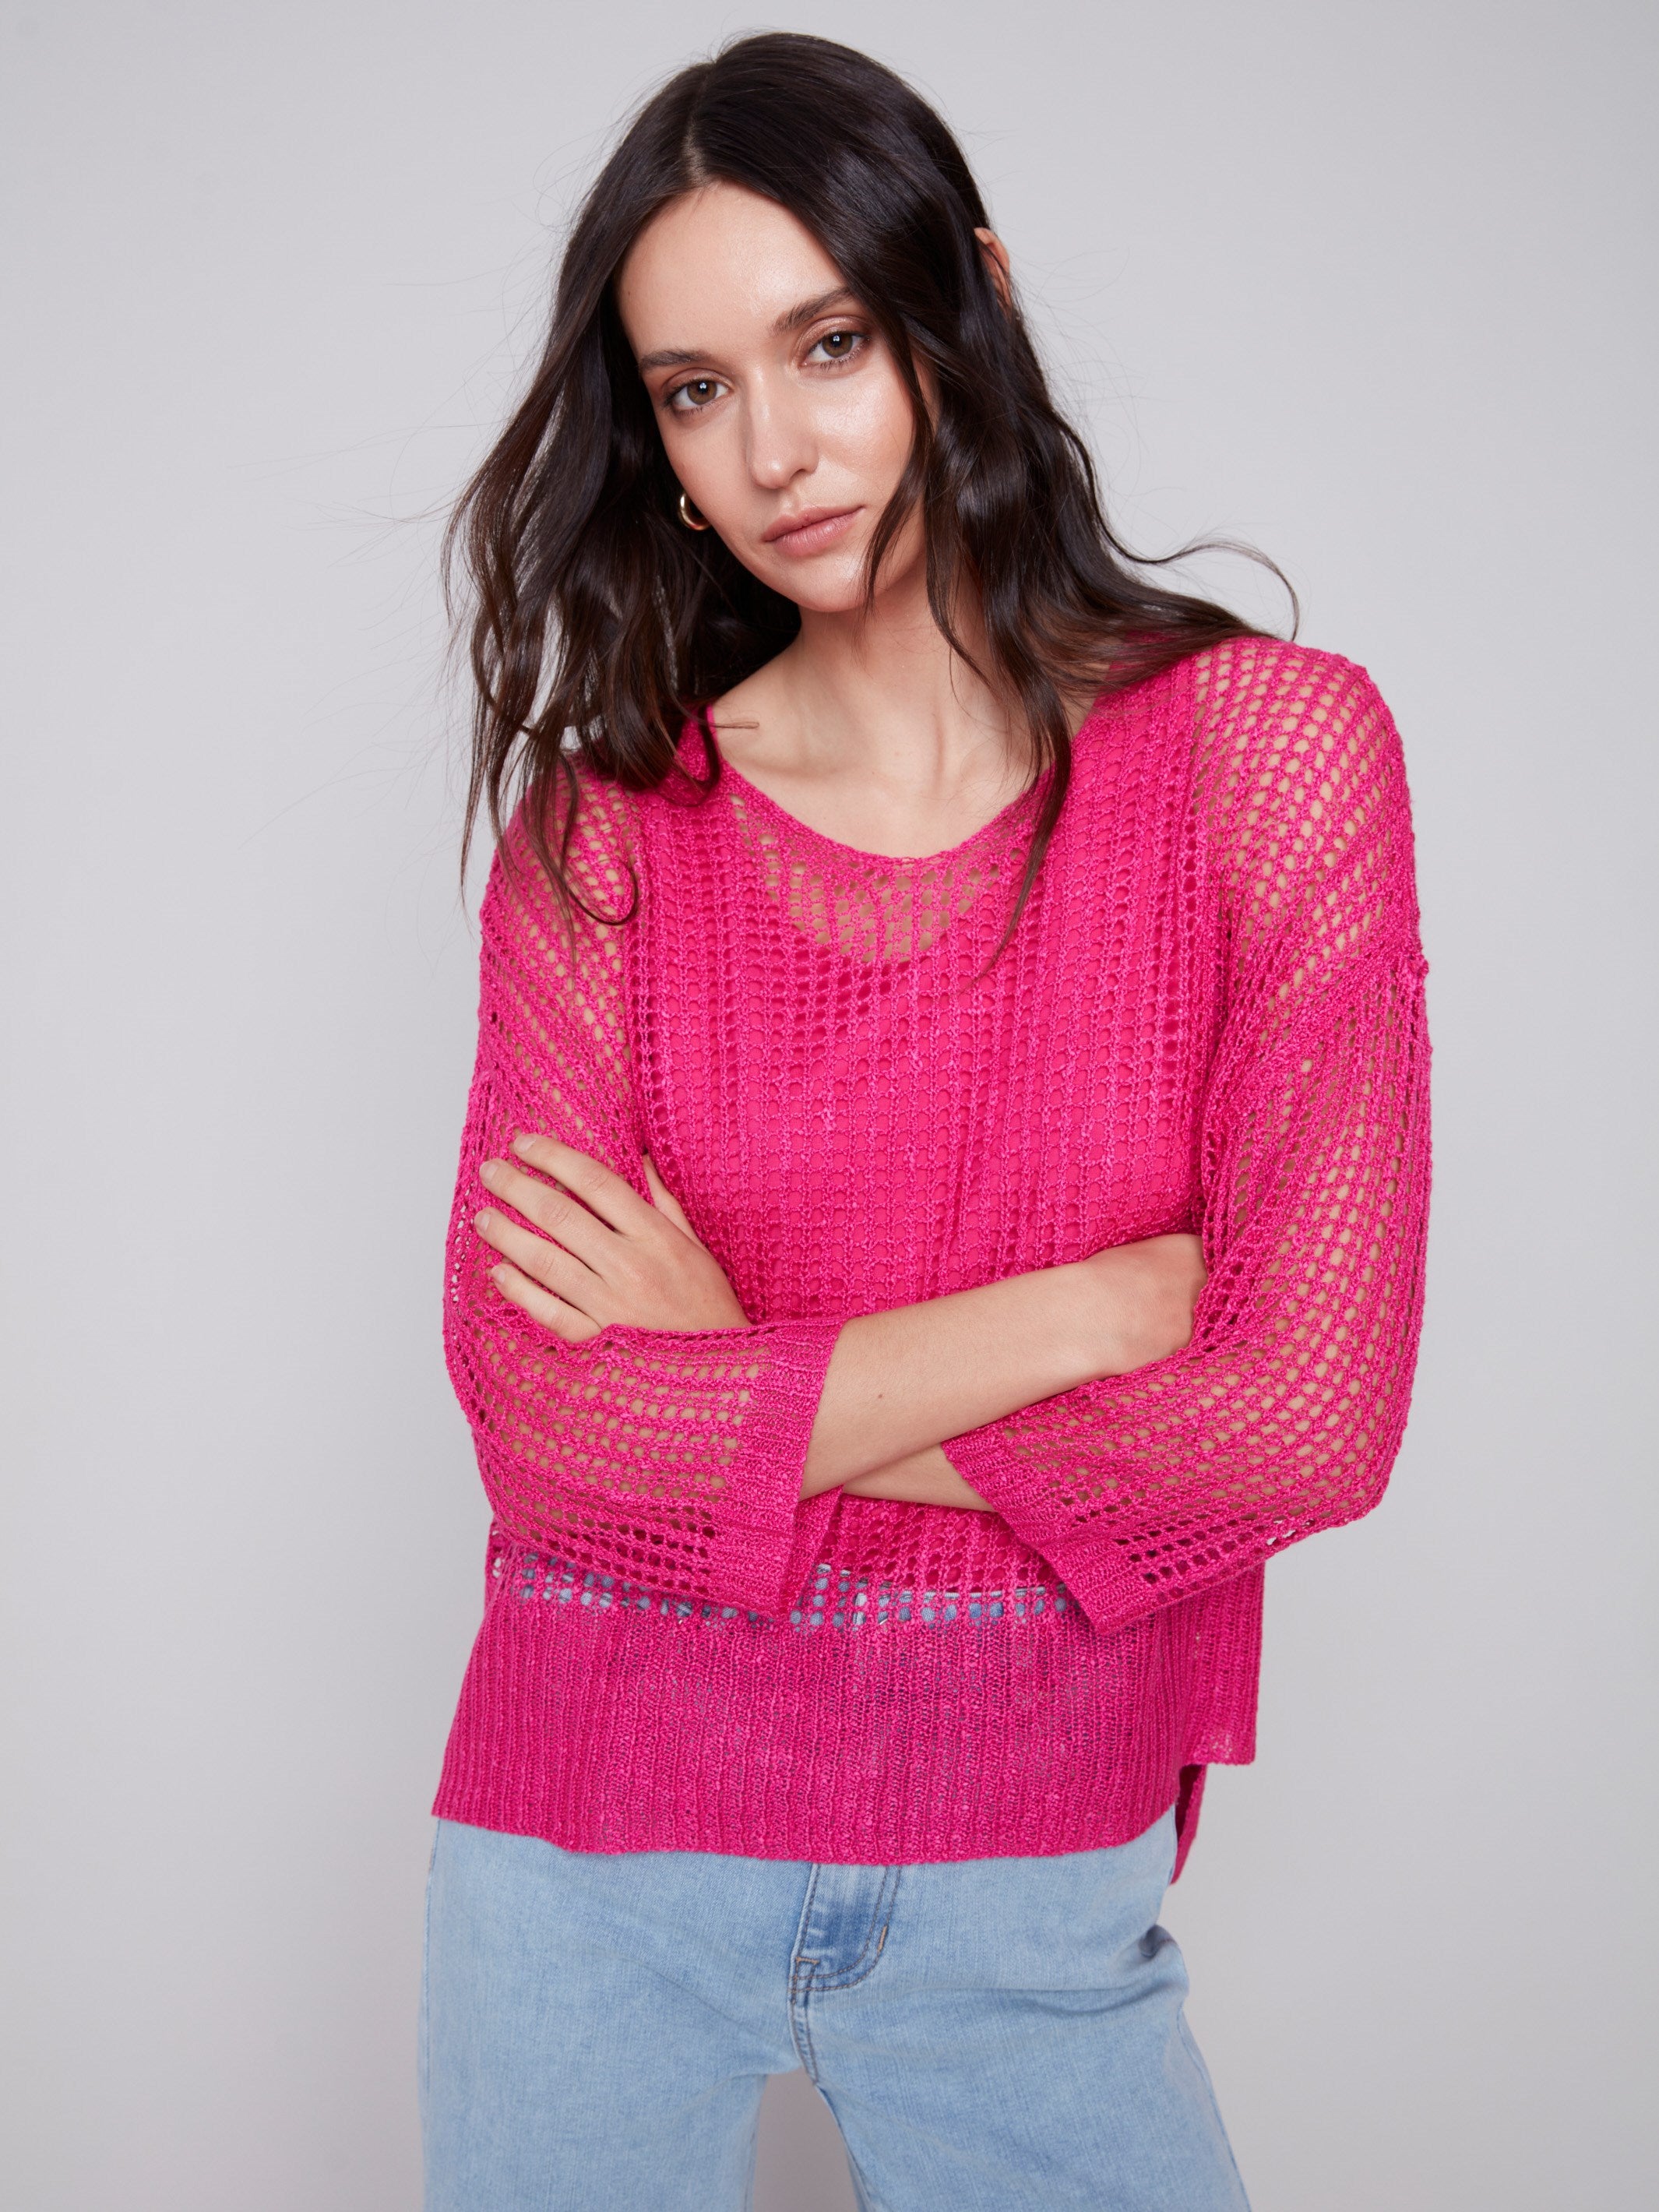 Fishnet Crochet Sweater - Punch - Charlie B Collection Canada - Image 6